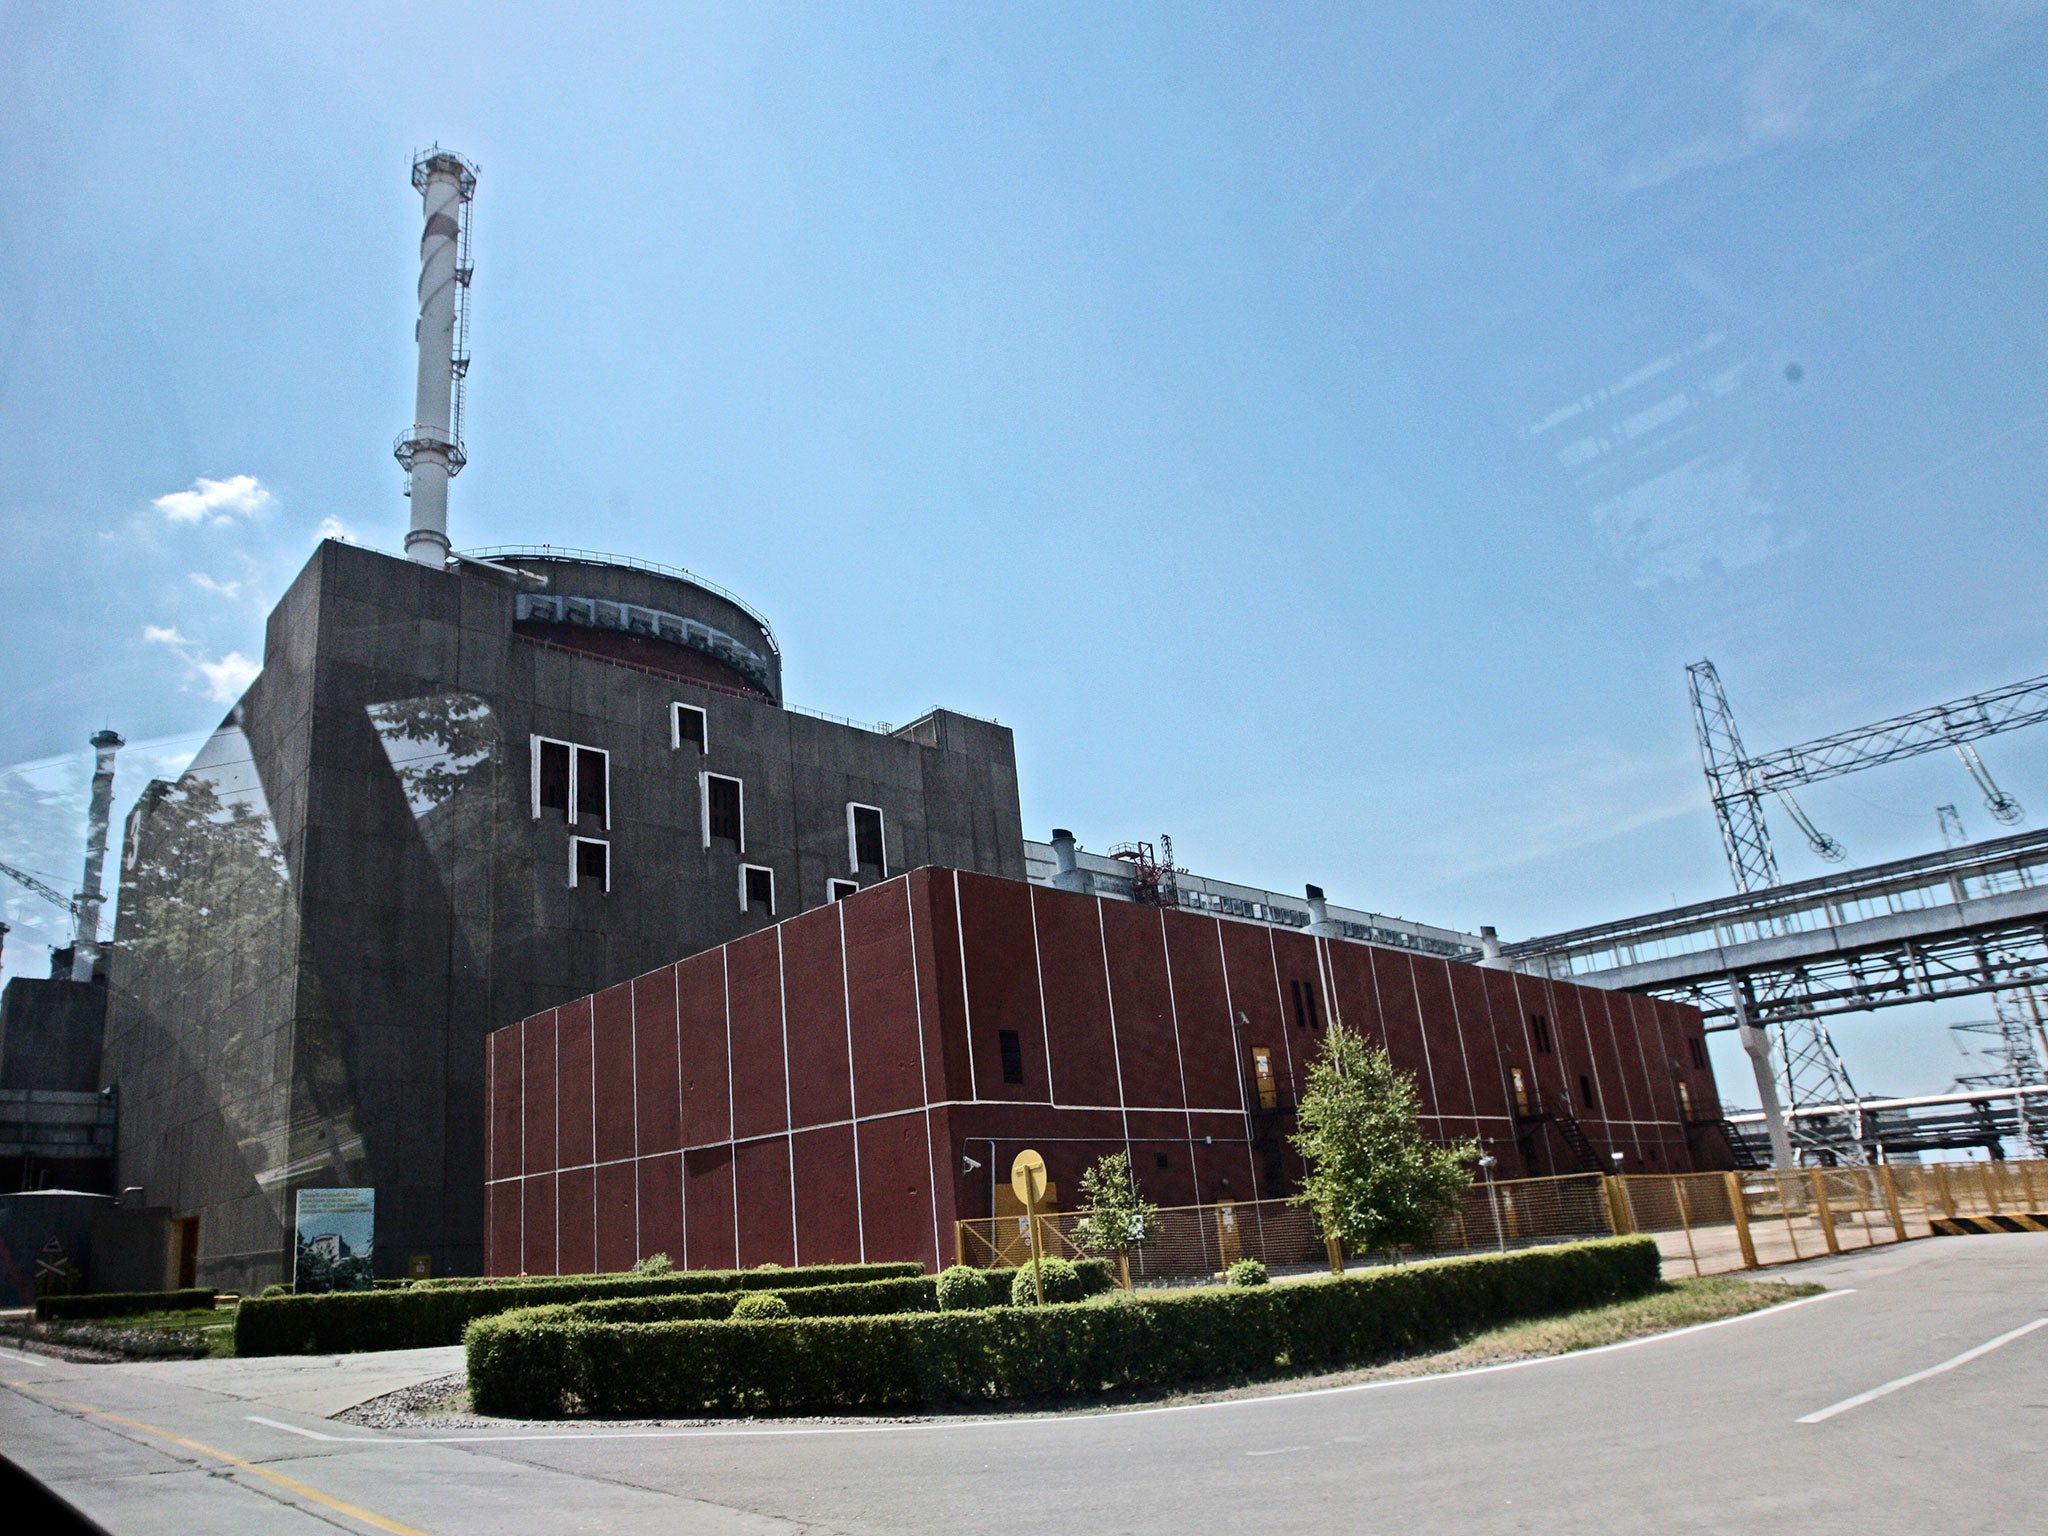 One unit of Ukraine's Zaporozhiya nuclear power plant, the largest in Europe, has been taken offline because of generator problems. It is the second time this month that a unit at the plant has been taken out of service